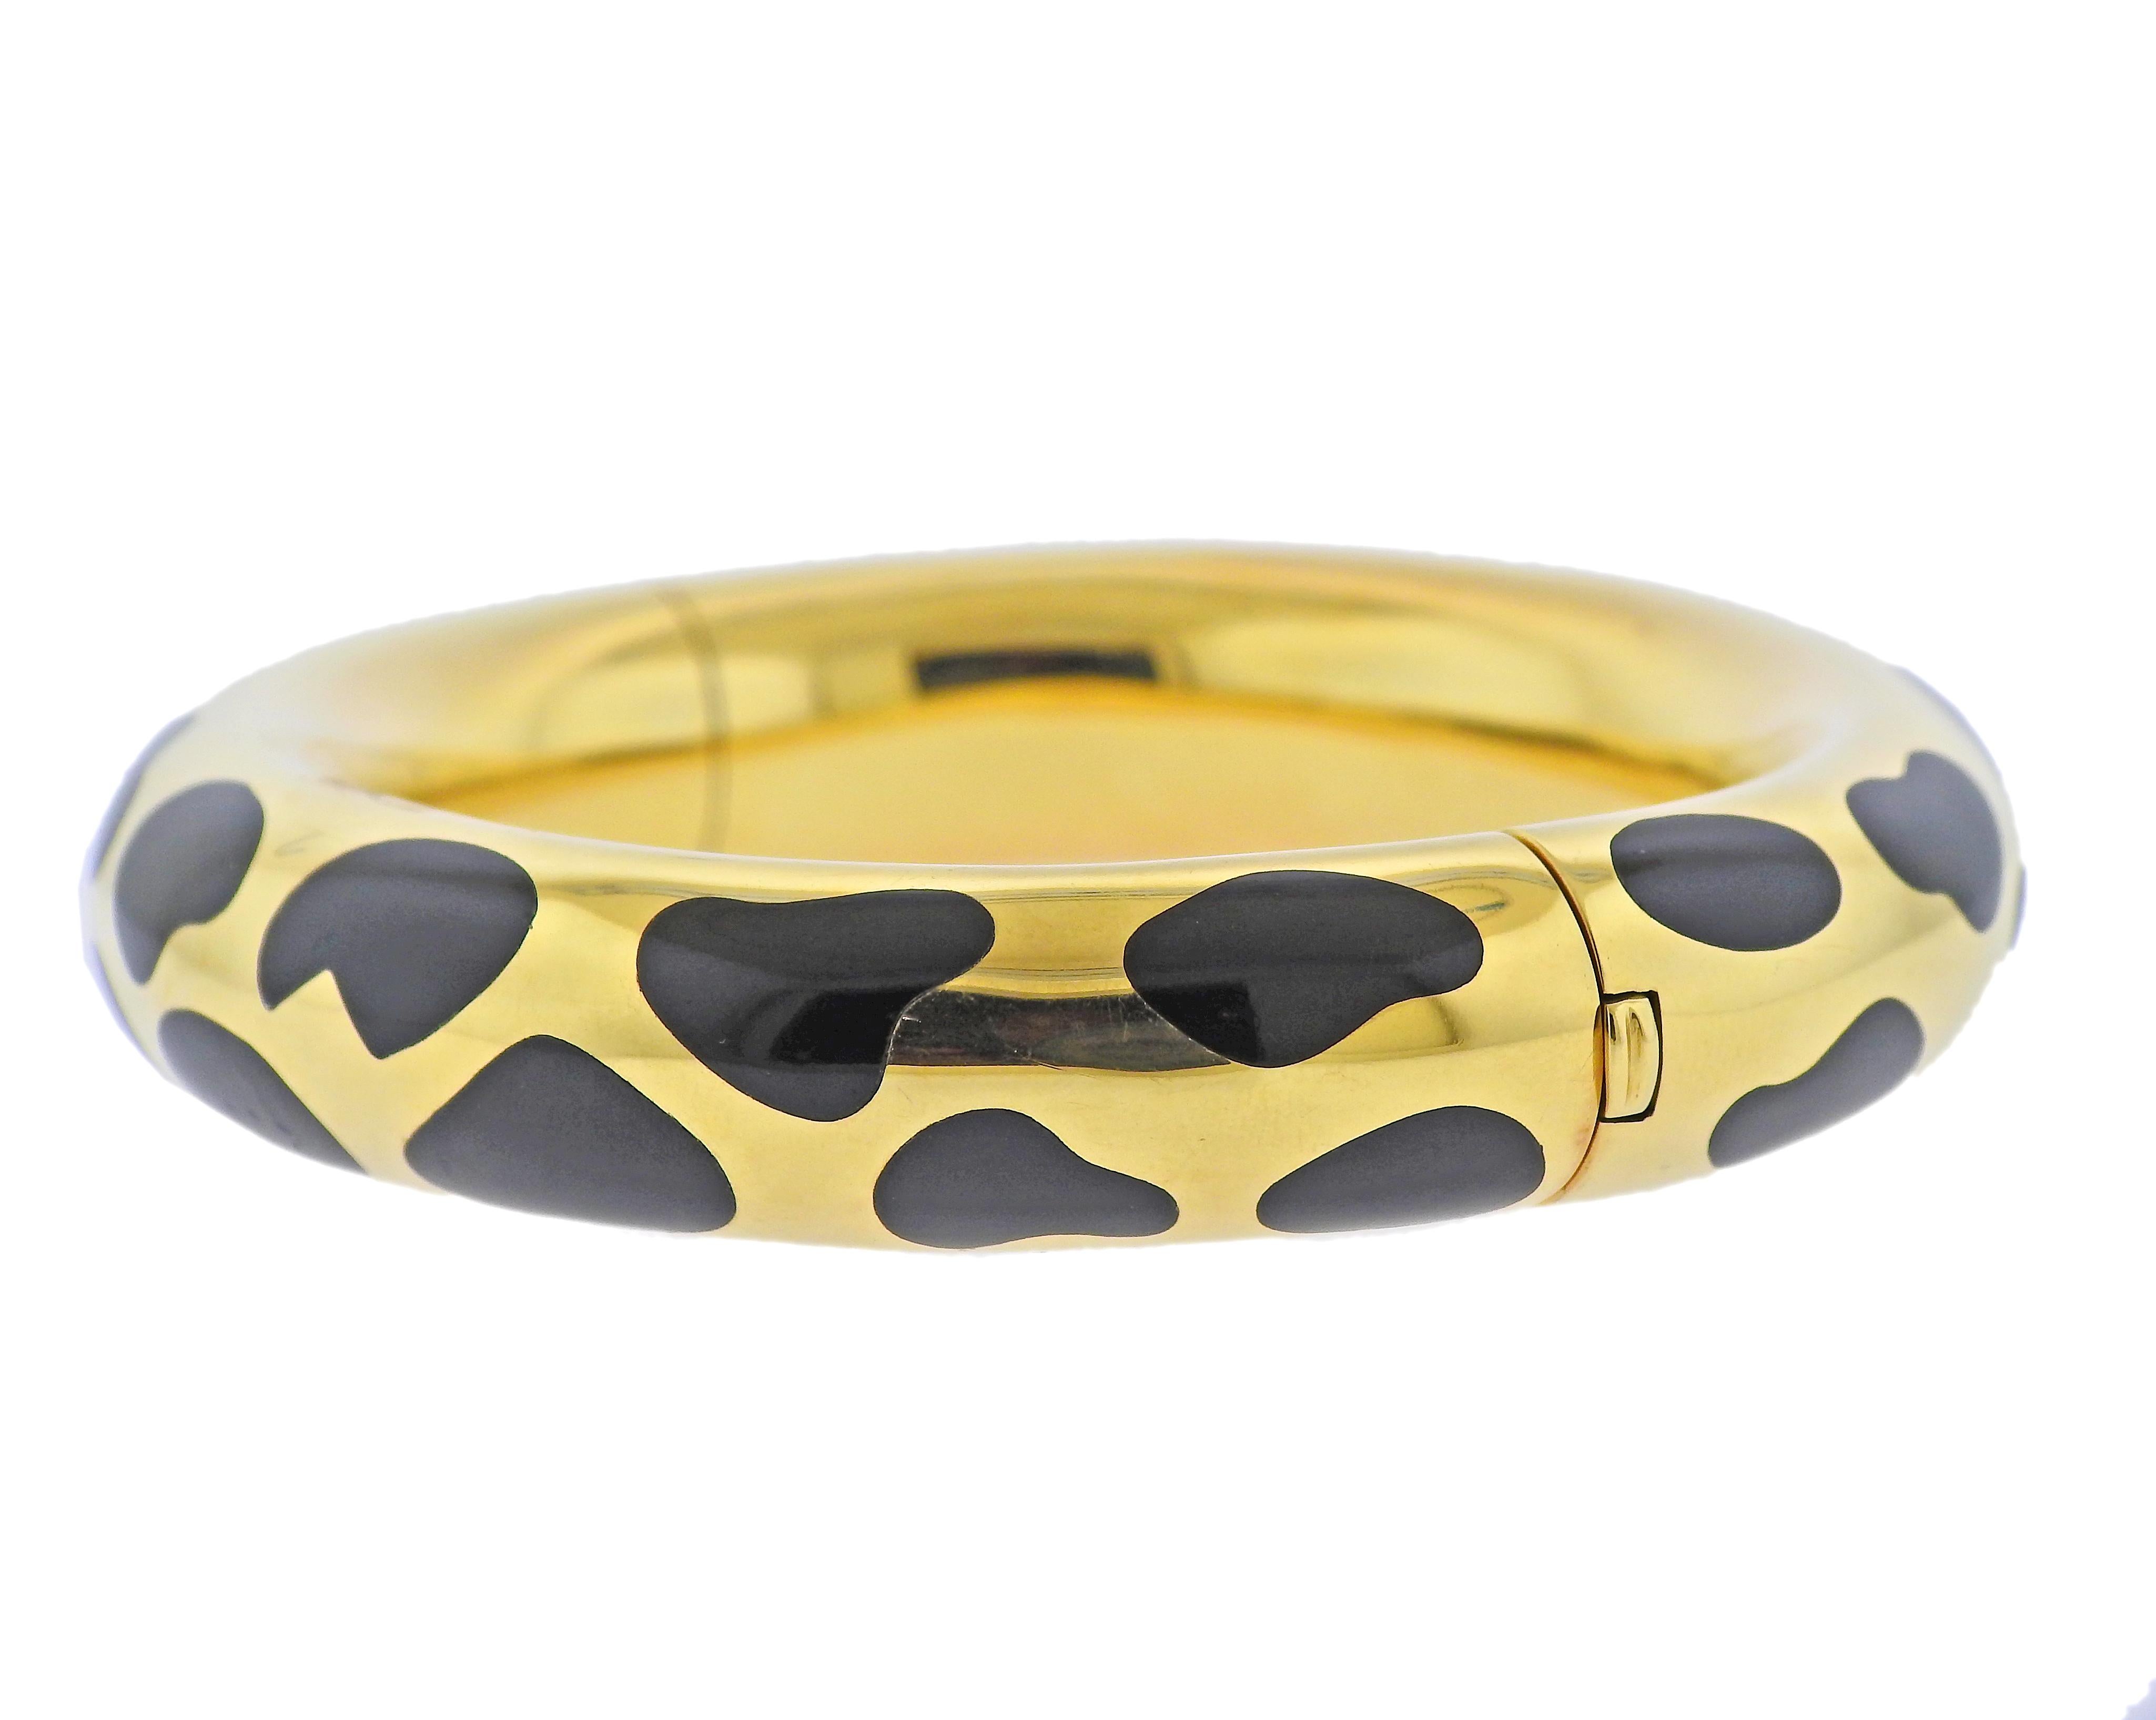 18k yellow gold bangle bracelet by Tiffany & Ci with inlayed black jade. Bracelet will fit up to 7.25